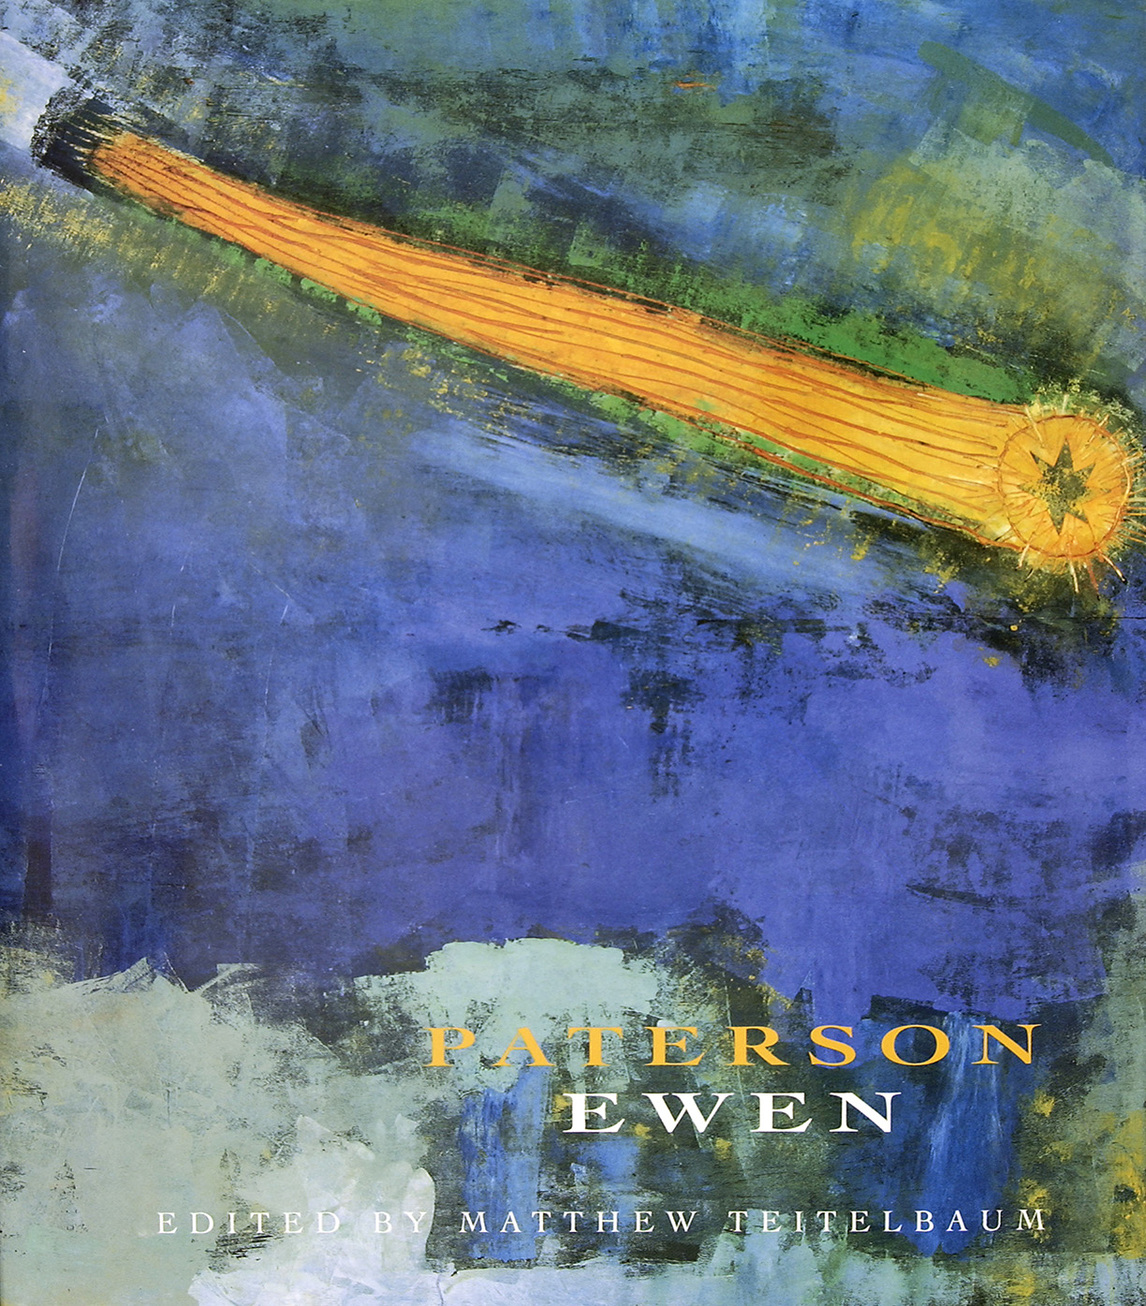 Cover of Paterson Ewen, 1996